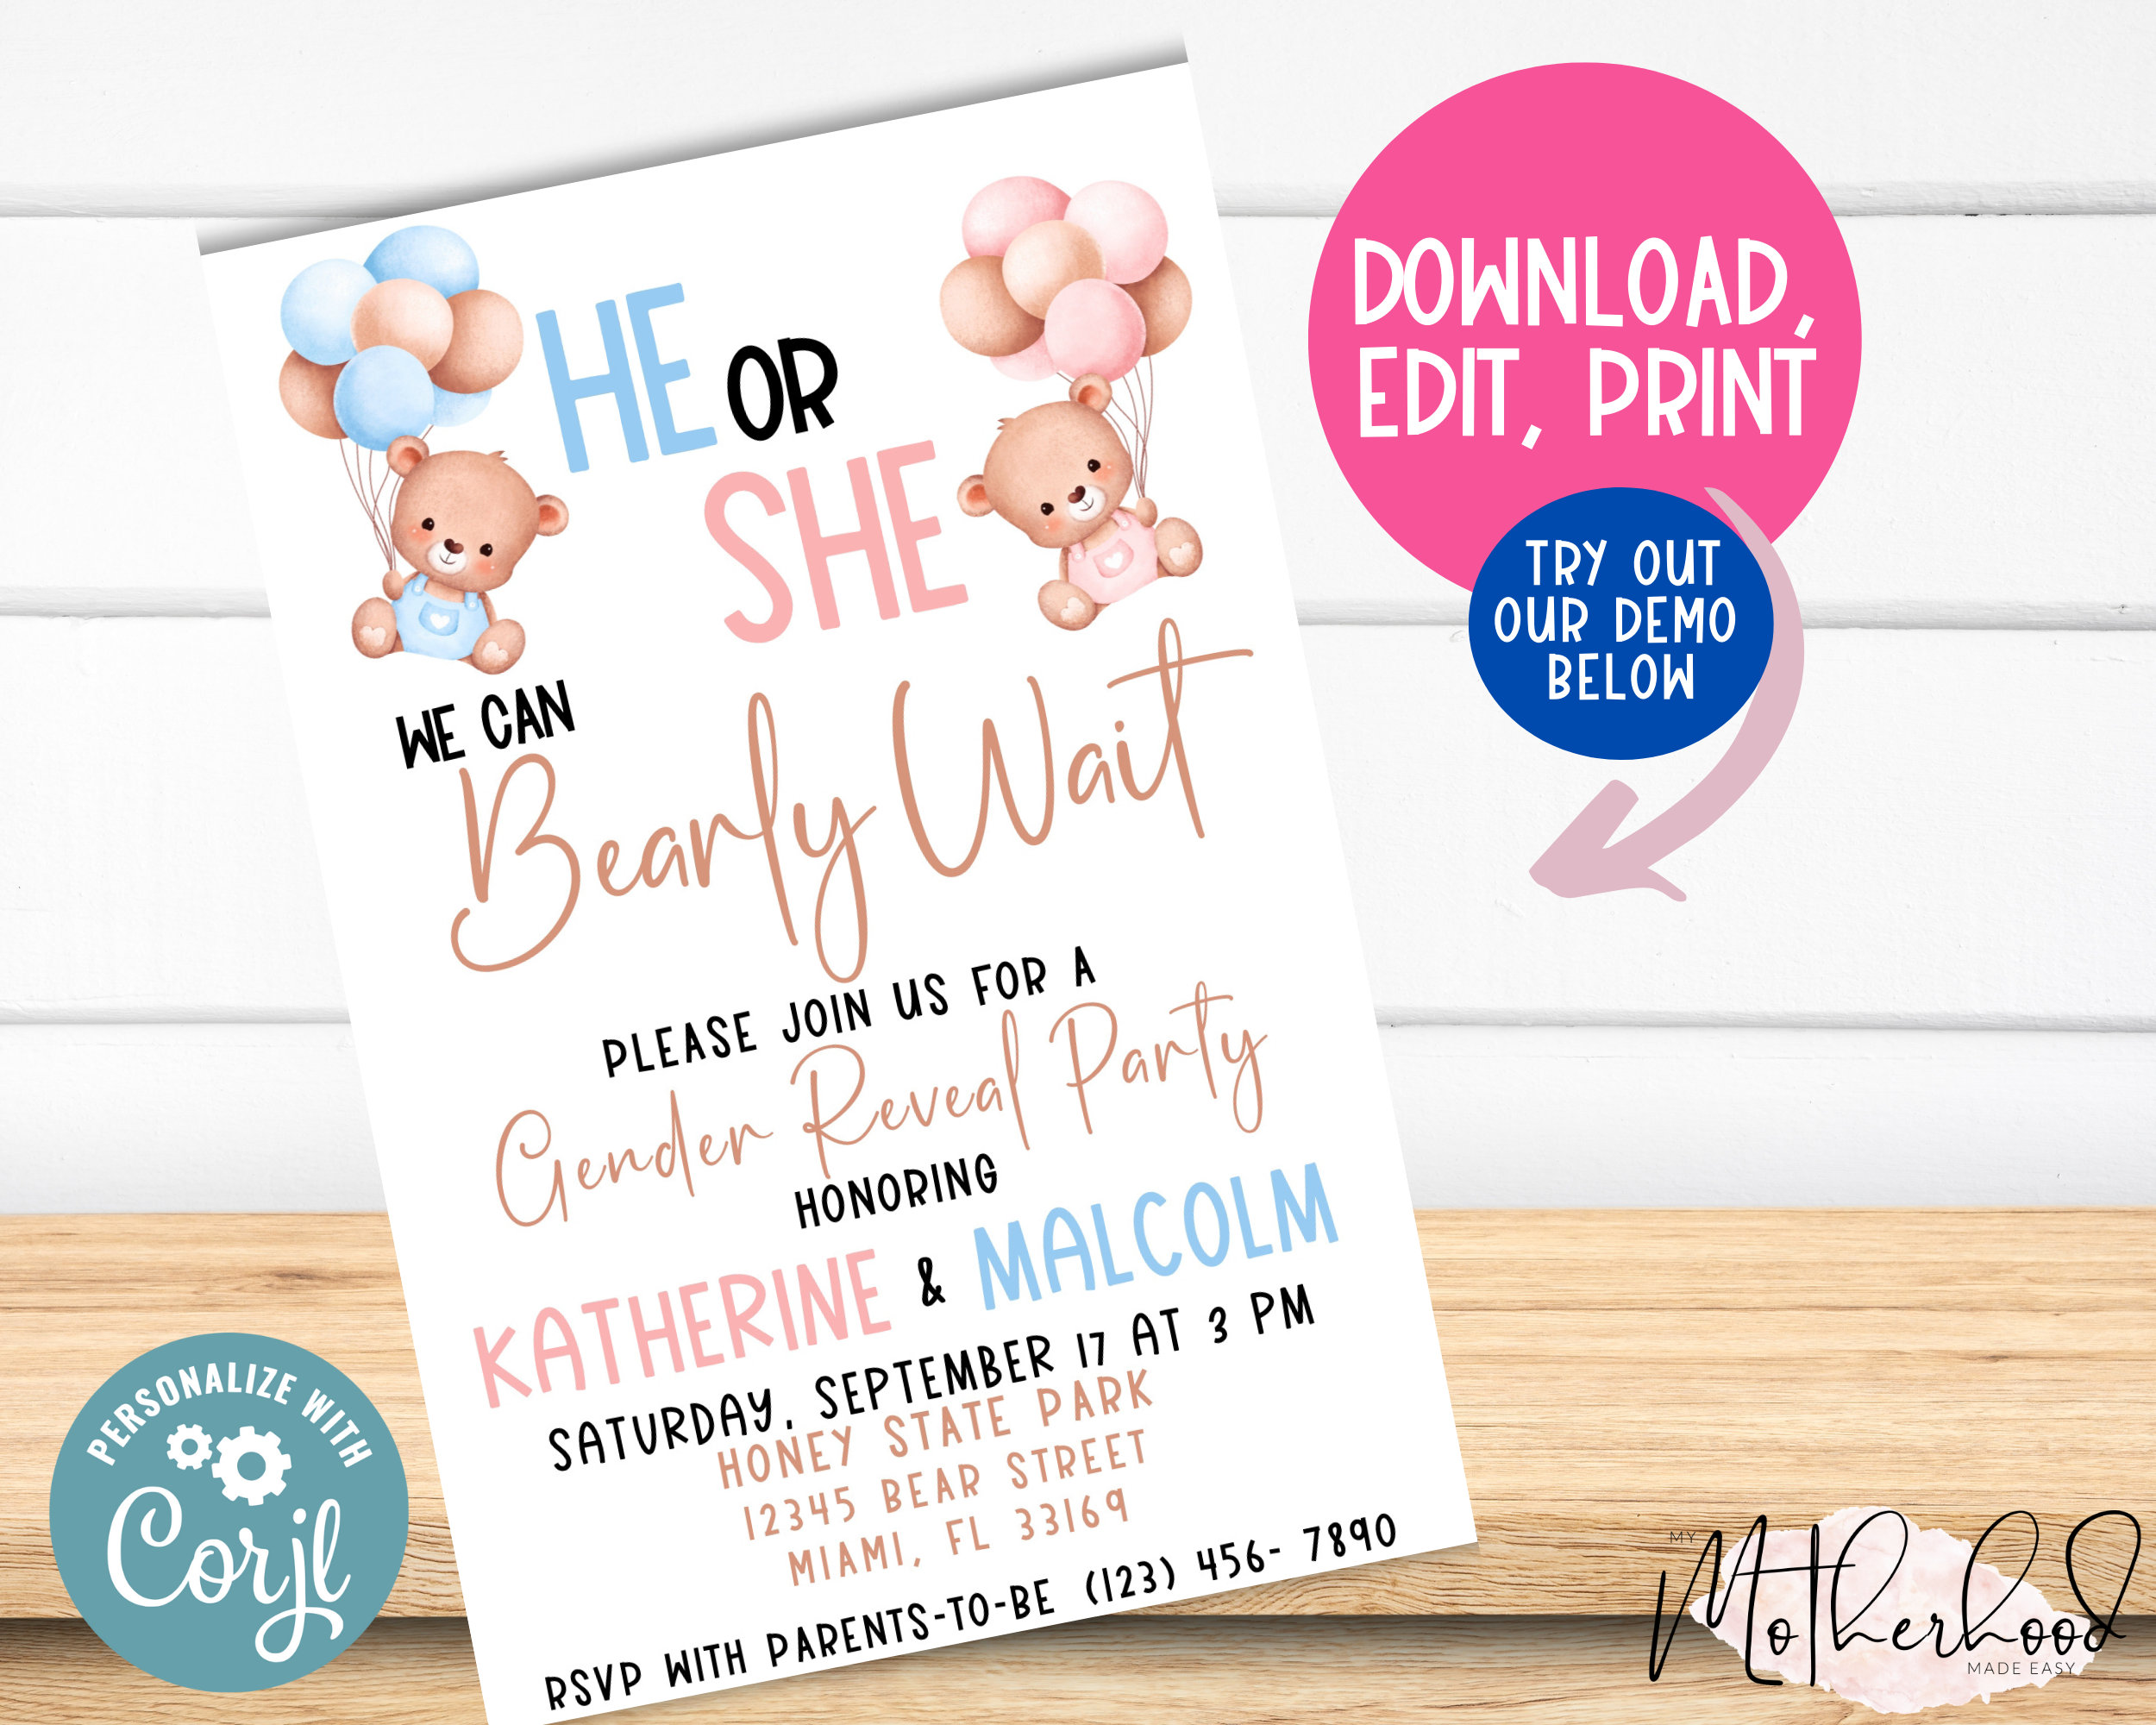 He Or She We Can Bearly Wait- Gender Reveal Invitation - Pink and Blue- Teddy Bear - He or She- Boy or Girl - Teddy Bear  Introducing the Editable He Or She We Can Bearly Wait Gender Reveal Party Invitation Card! This beautiful and personalizable Gender Reveal Party Invitation is the perfect way to invite your amazing friends and family to your gender reveal party. With a variety of colors and fonts to choose from, you can easily customize this party announcement to perfectly reflect your style. Whether you're sharing on social media or sending out physical party invitations, this stunning Gender Reveal Party Invitation is sure to get everyone excited for your baby reveal.